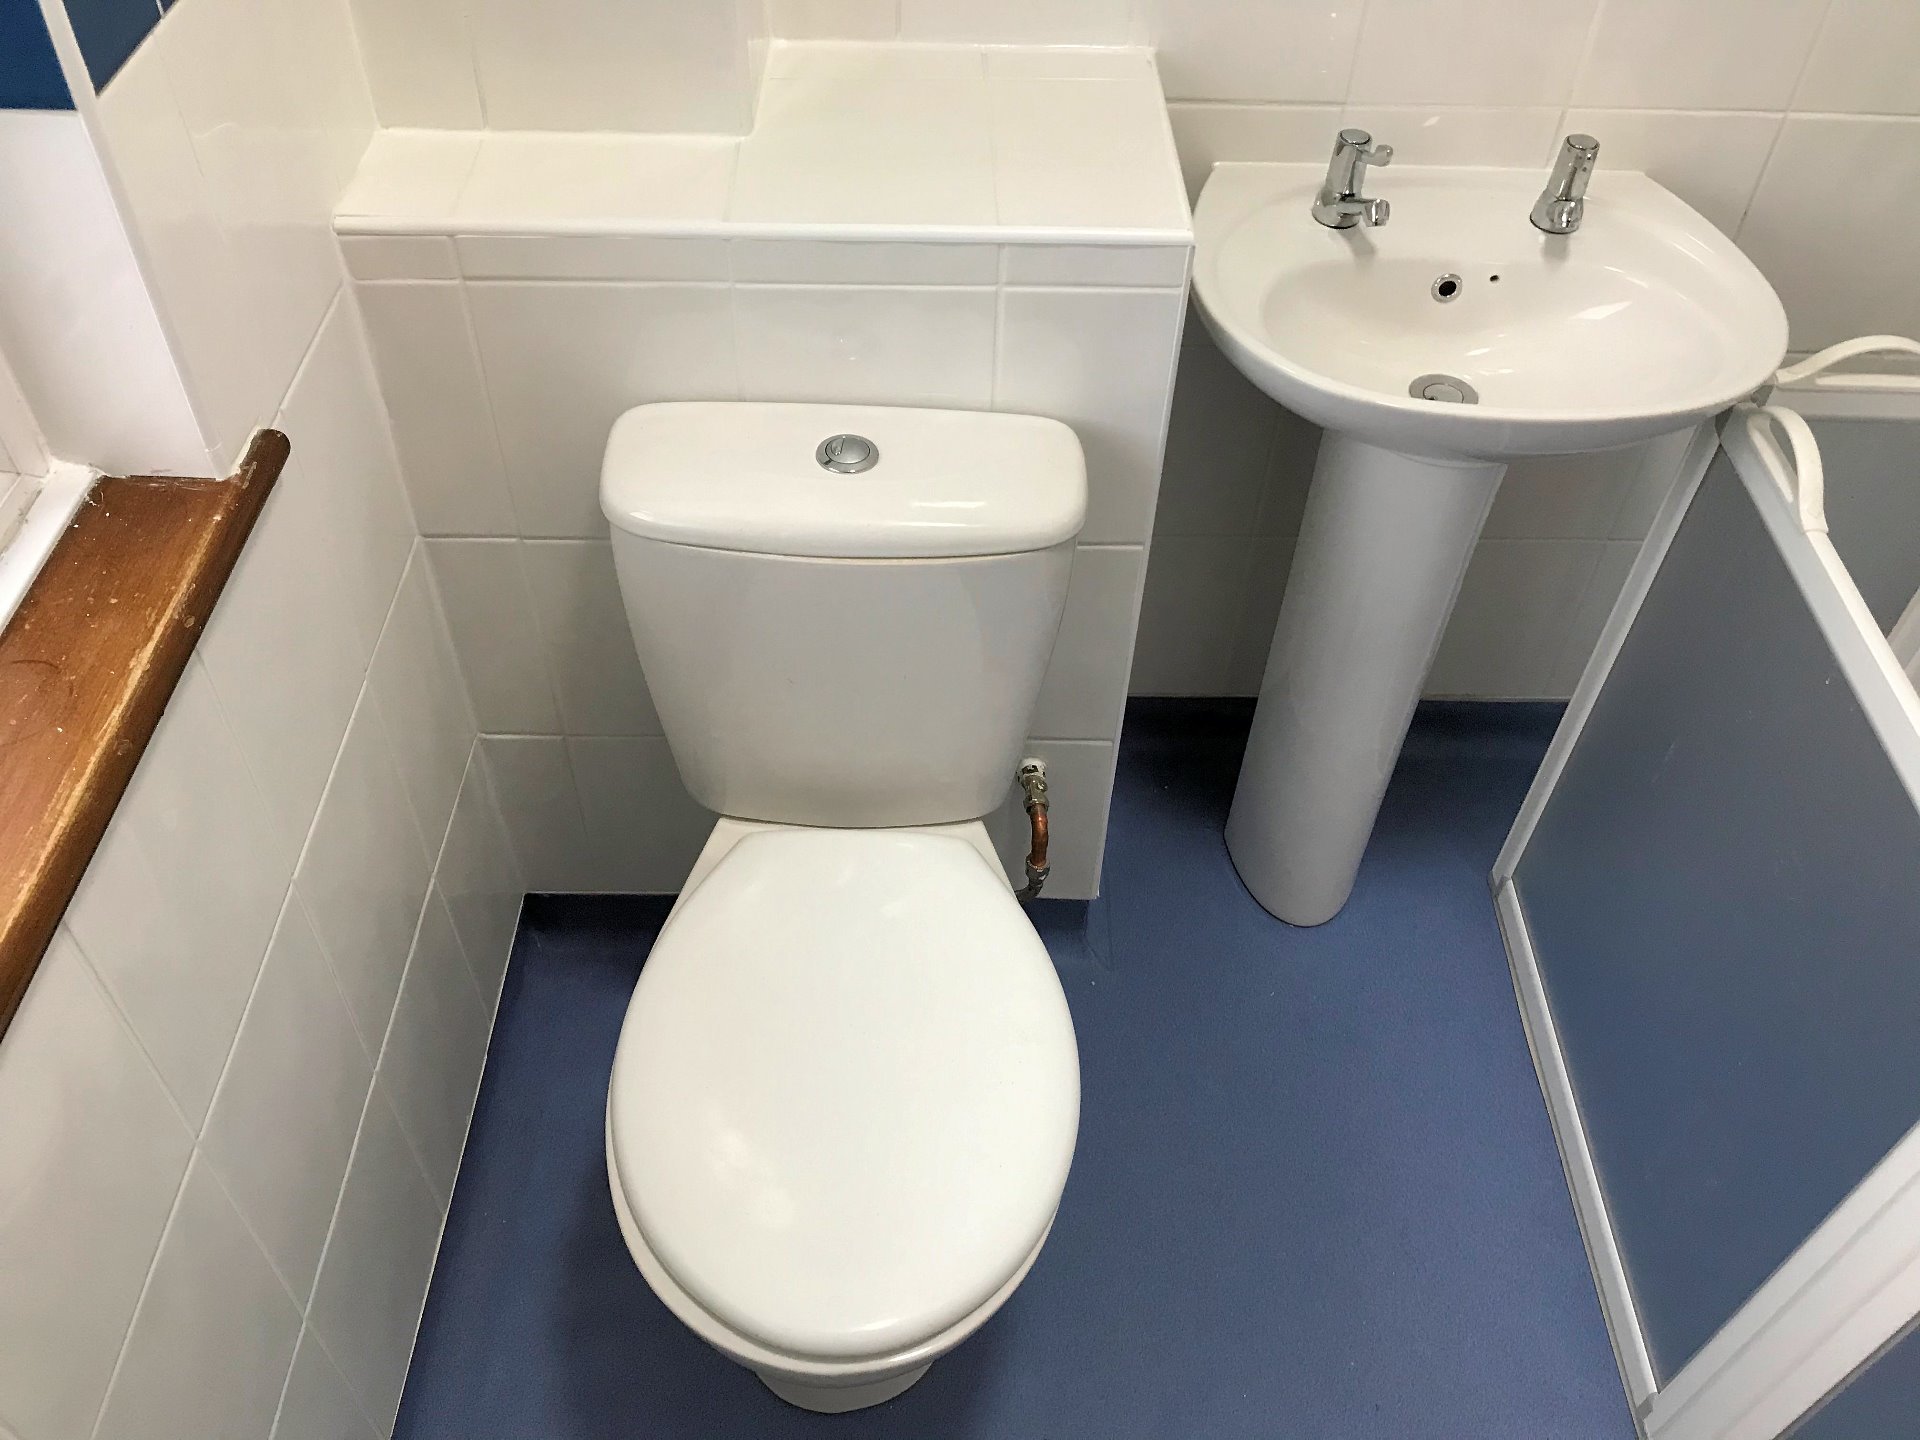 Low level suite with close coupled toilet allowing extra space, Barnstaple North Devon